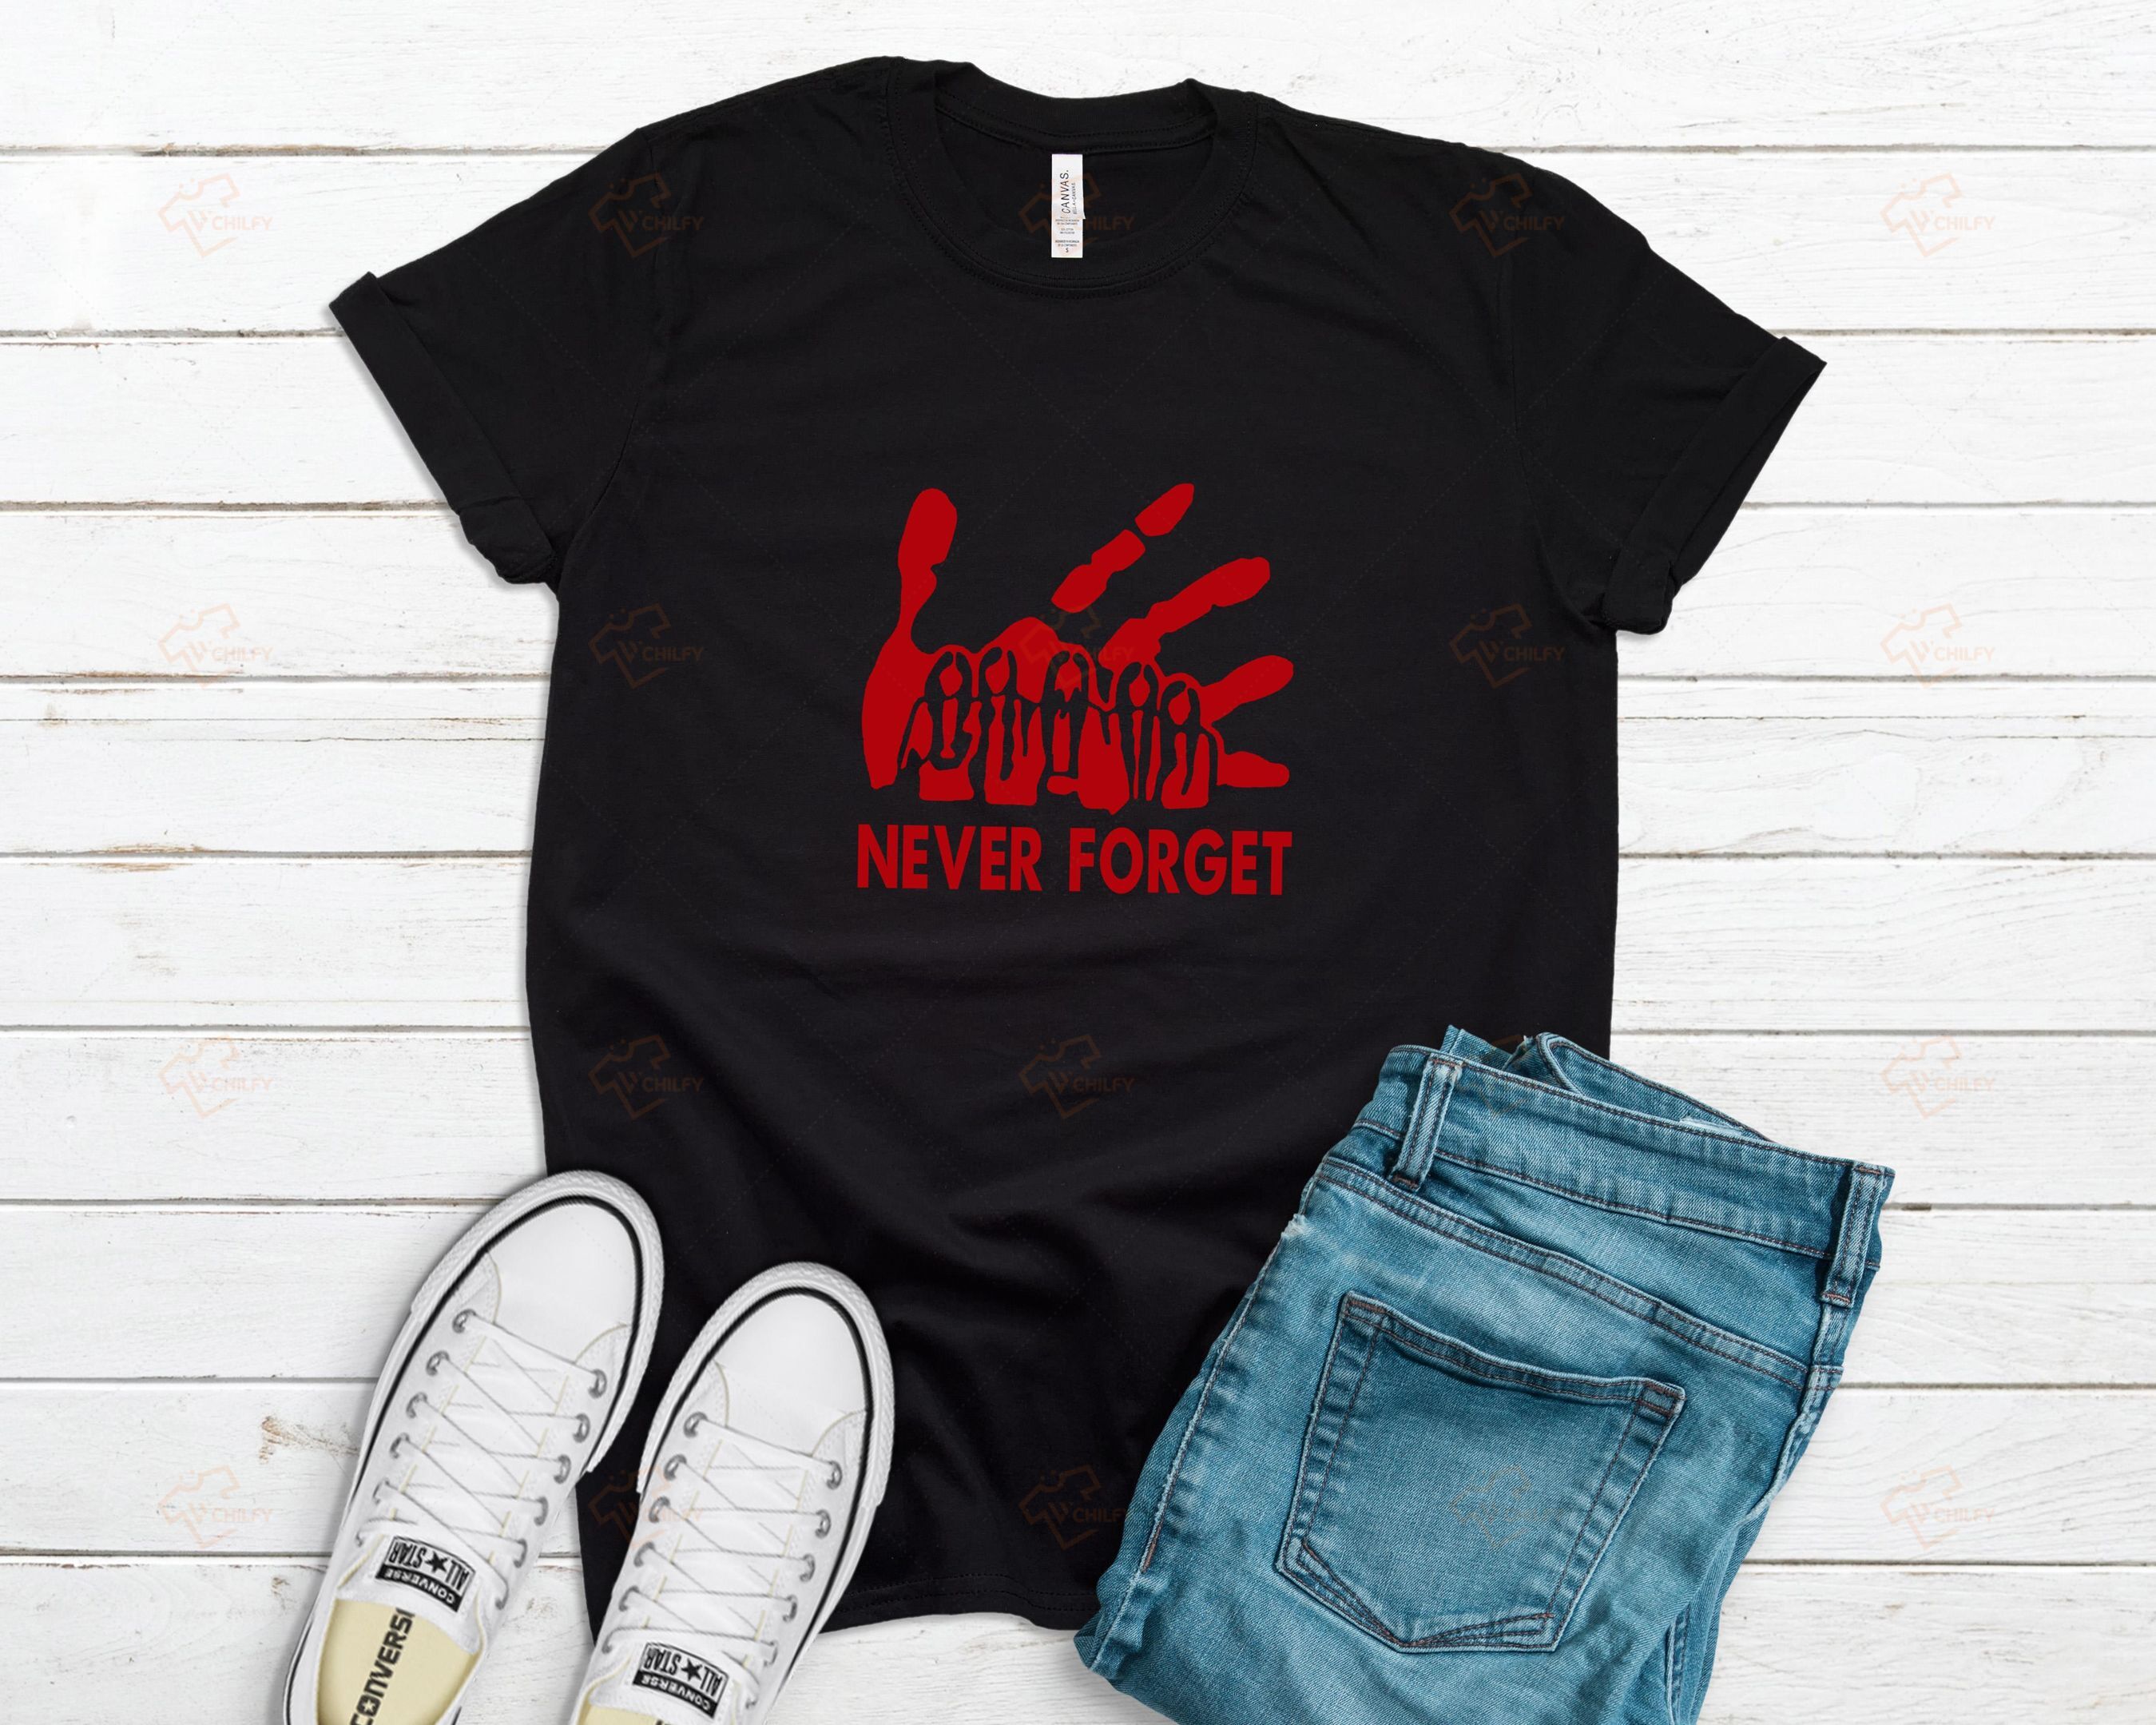 Never Forget shirt, badass Native t shirt, Native American shirt, gift for Indigenous people